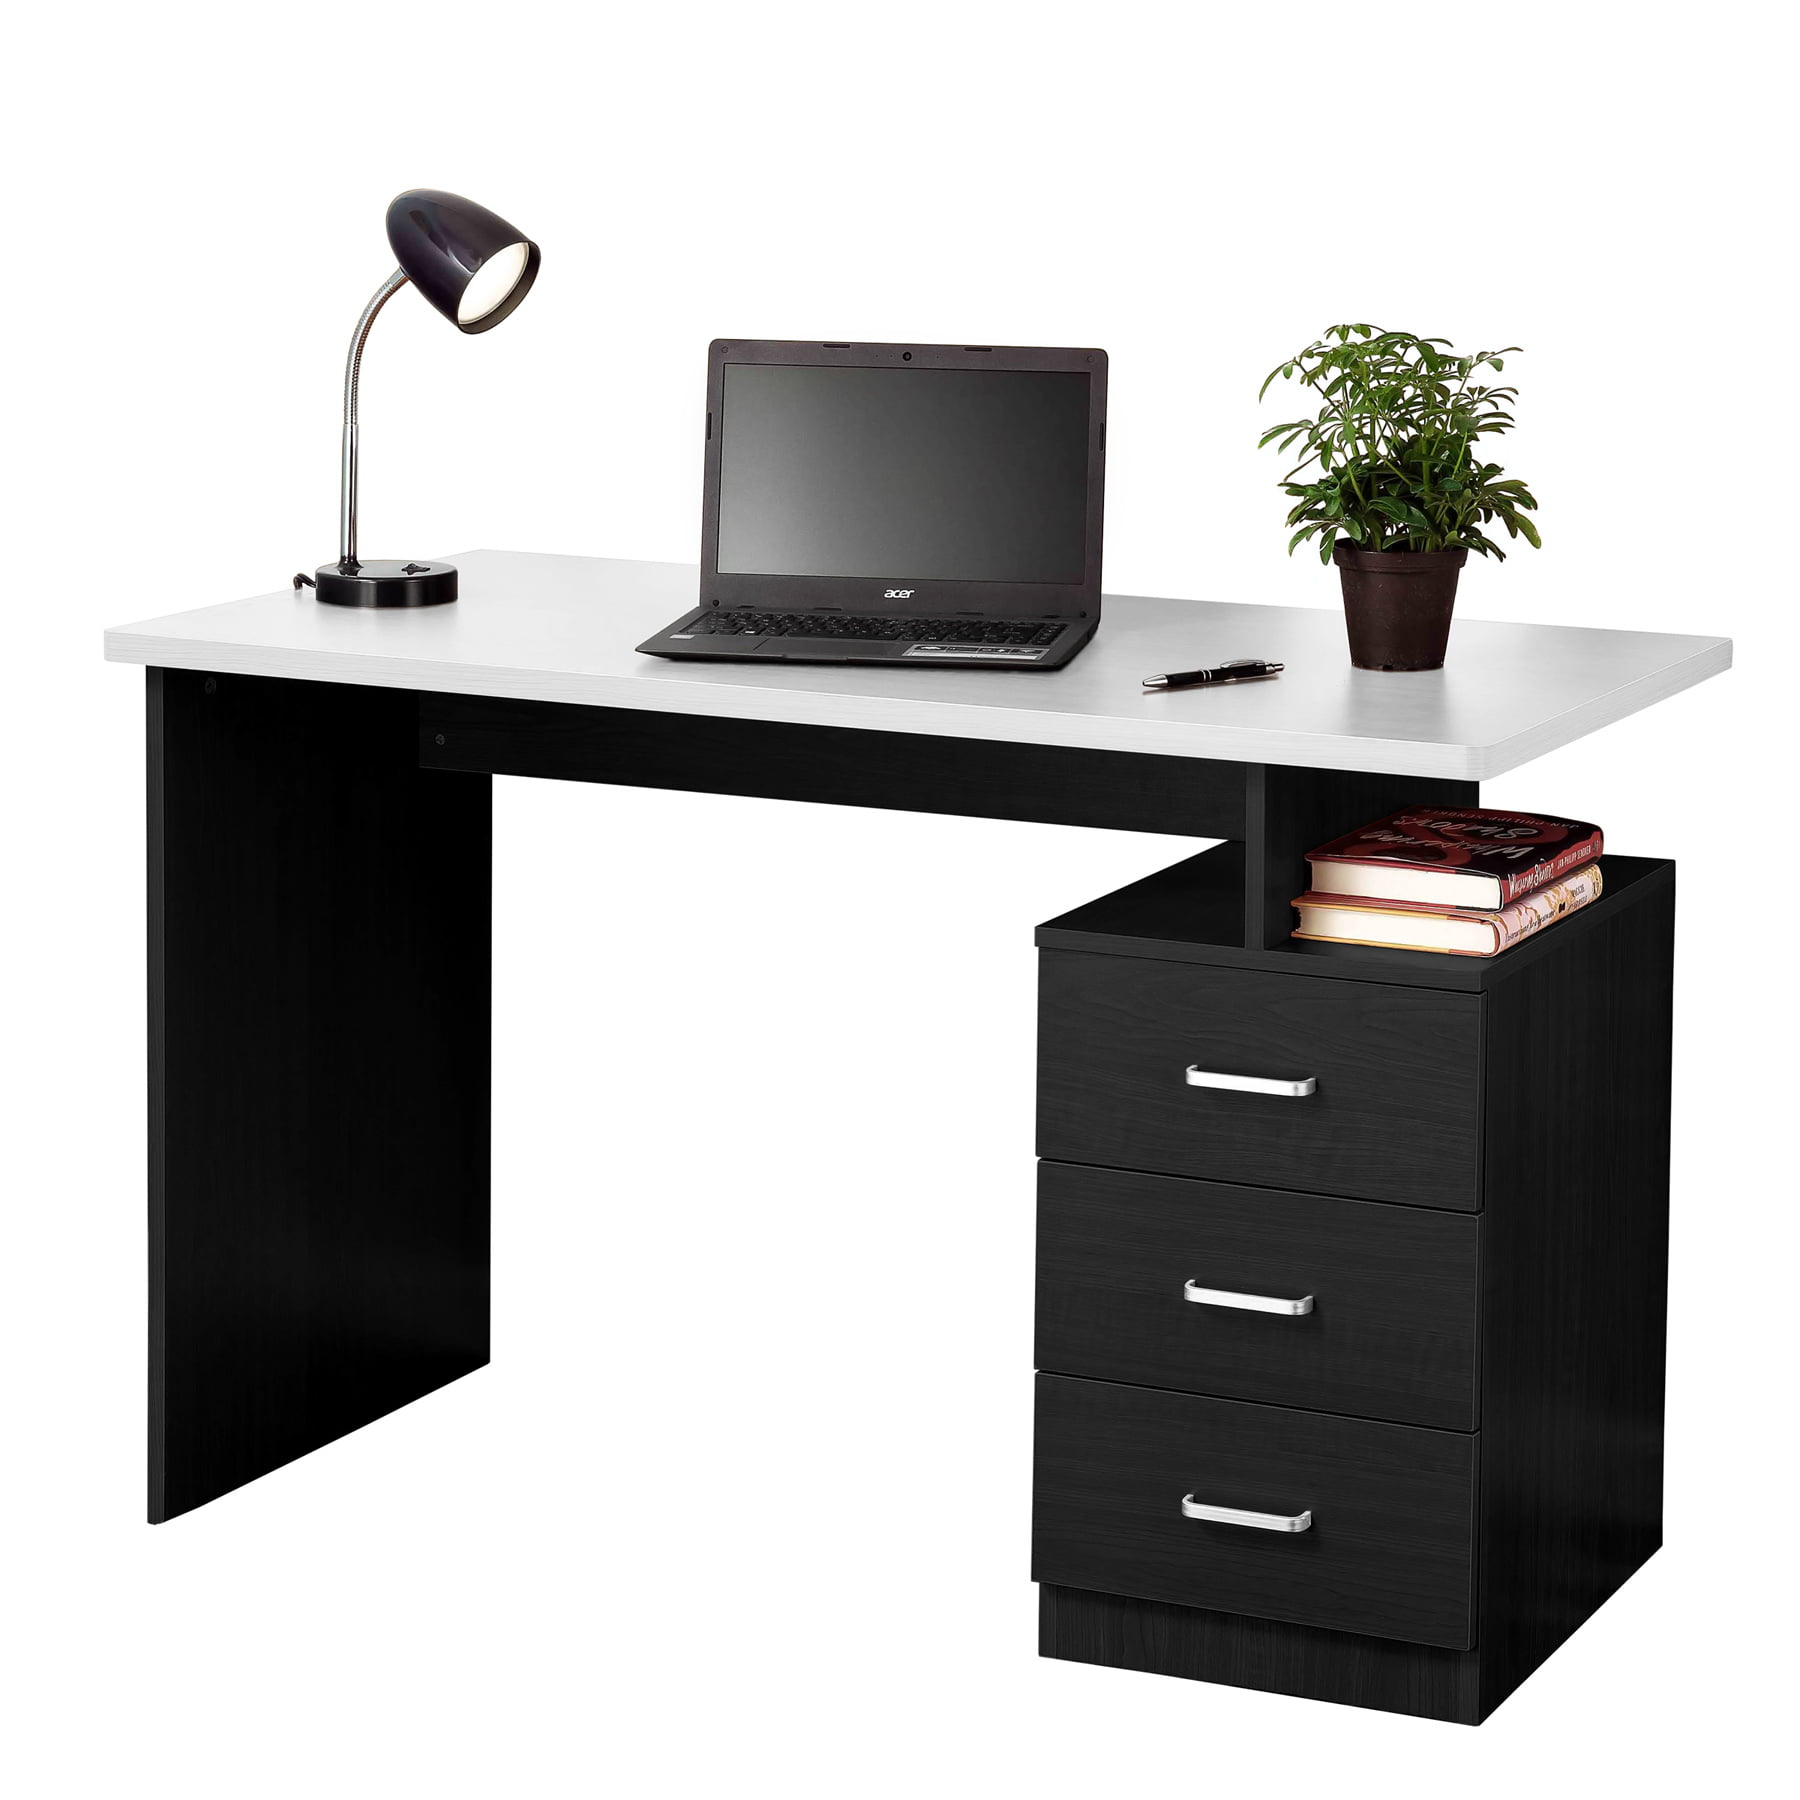 Featured image of post Black And White Executive Desk - Choose the ideal desk layout there are several common desk layouts among executive models.